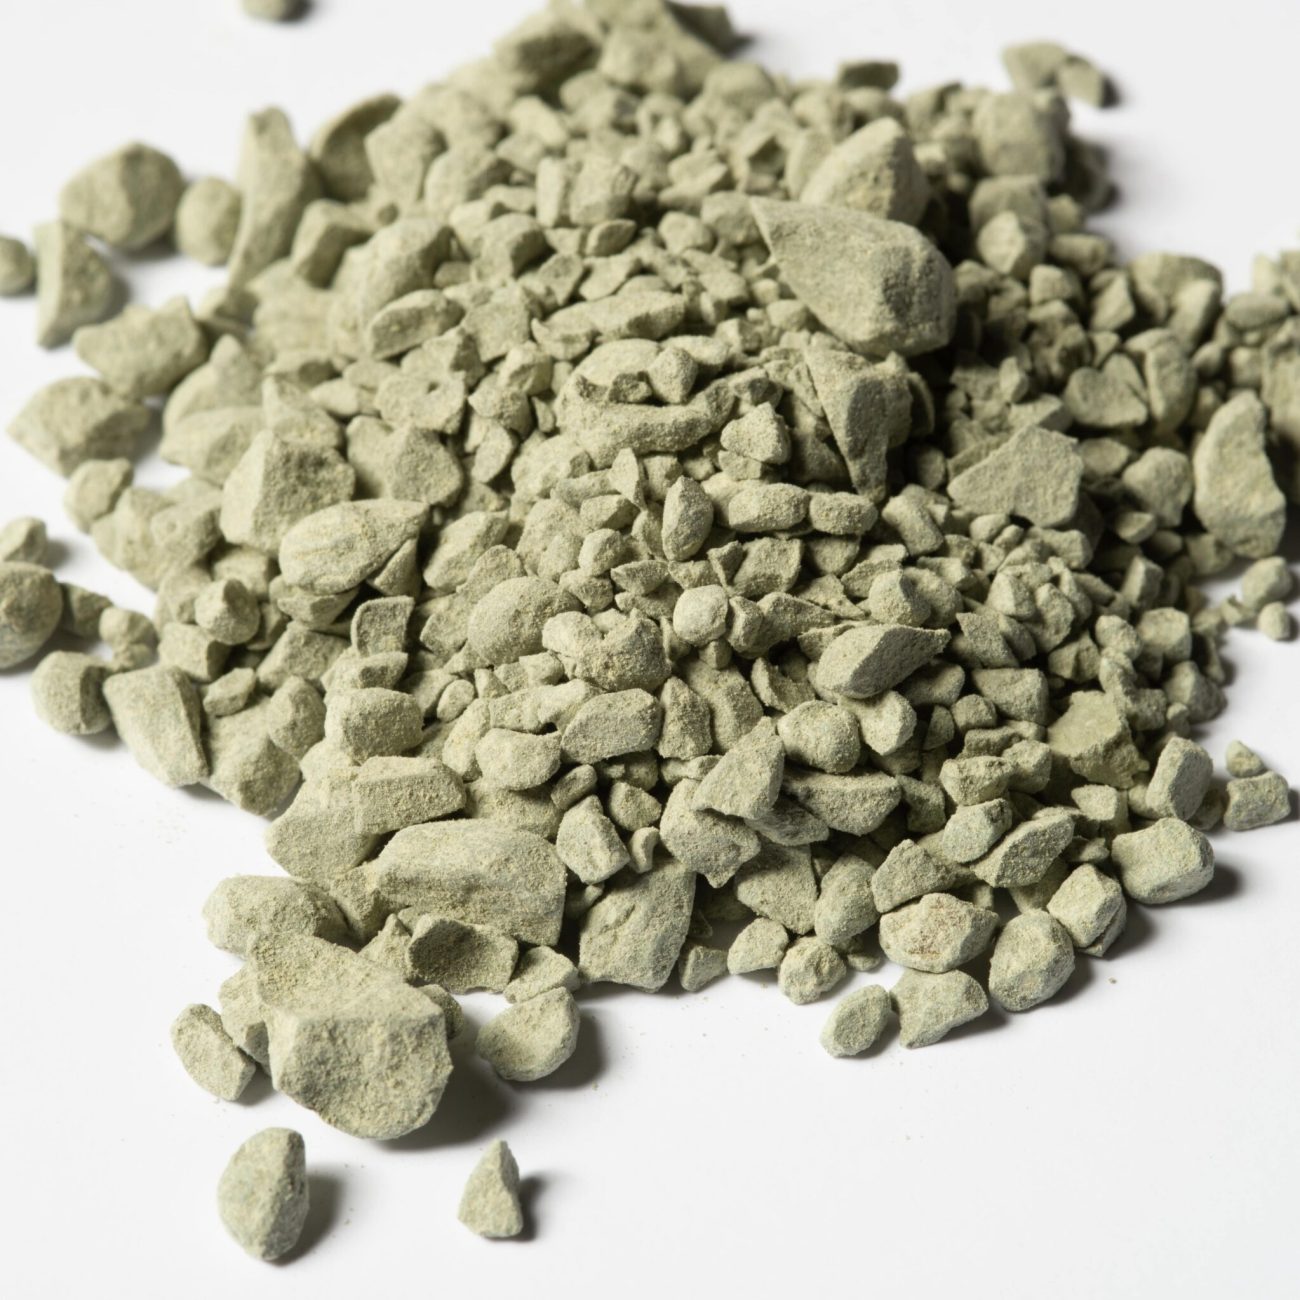 french-green-clay-1-scaled.jpg